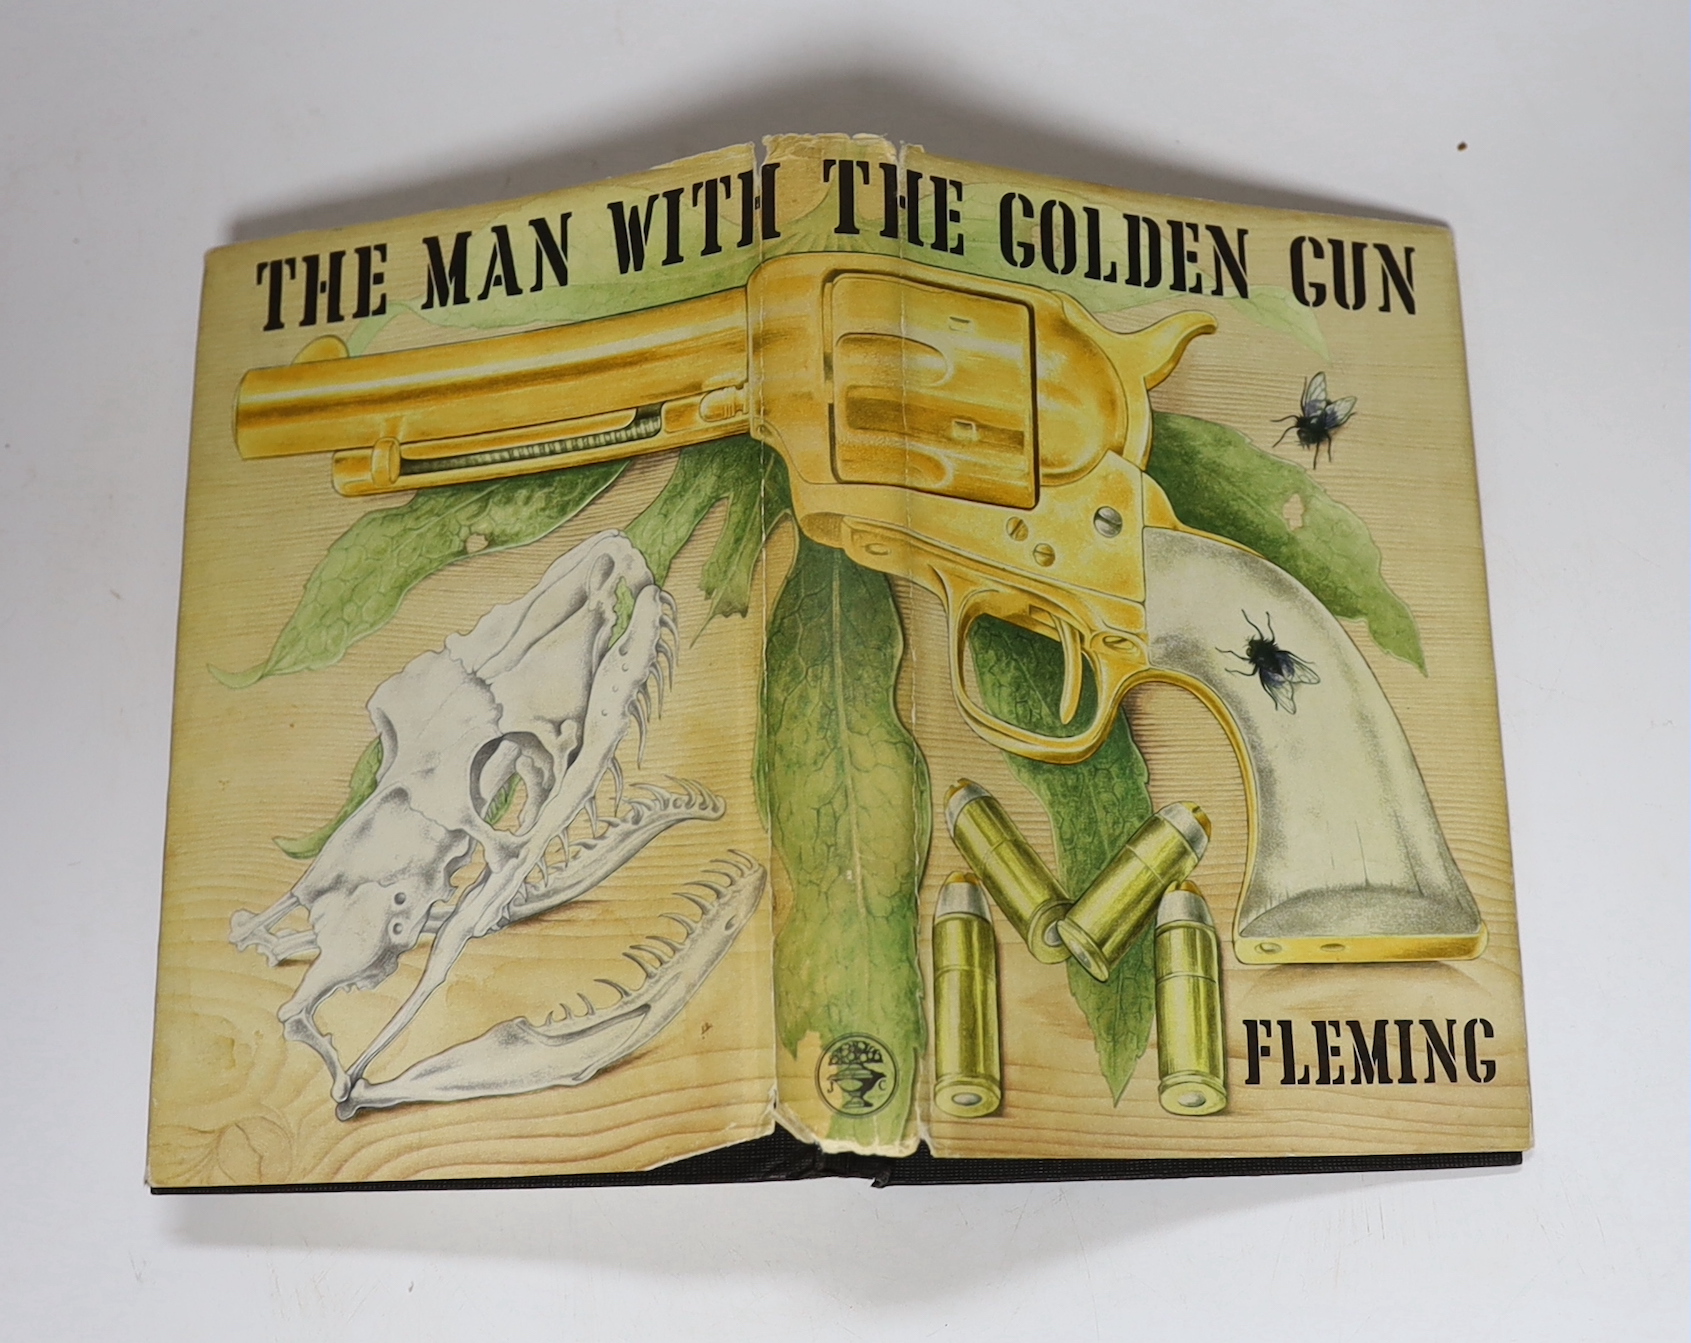 Fleming, Ian and Michael, Vivienne - The Spy Who Loved Me. 1st edition (1st issue). d-page illus., half title; blind and silver pictorial cloth and d/wrapper, red e/ps 1962